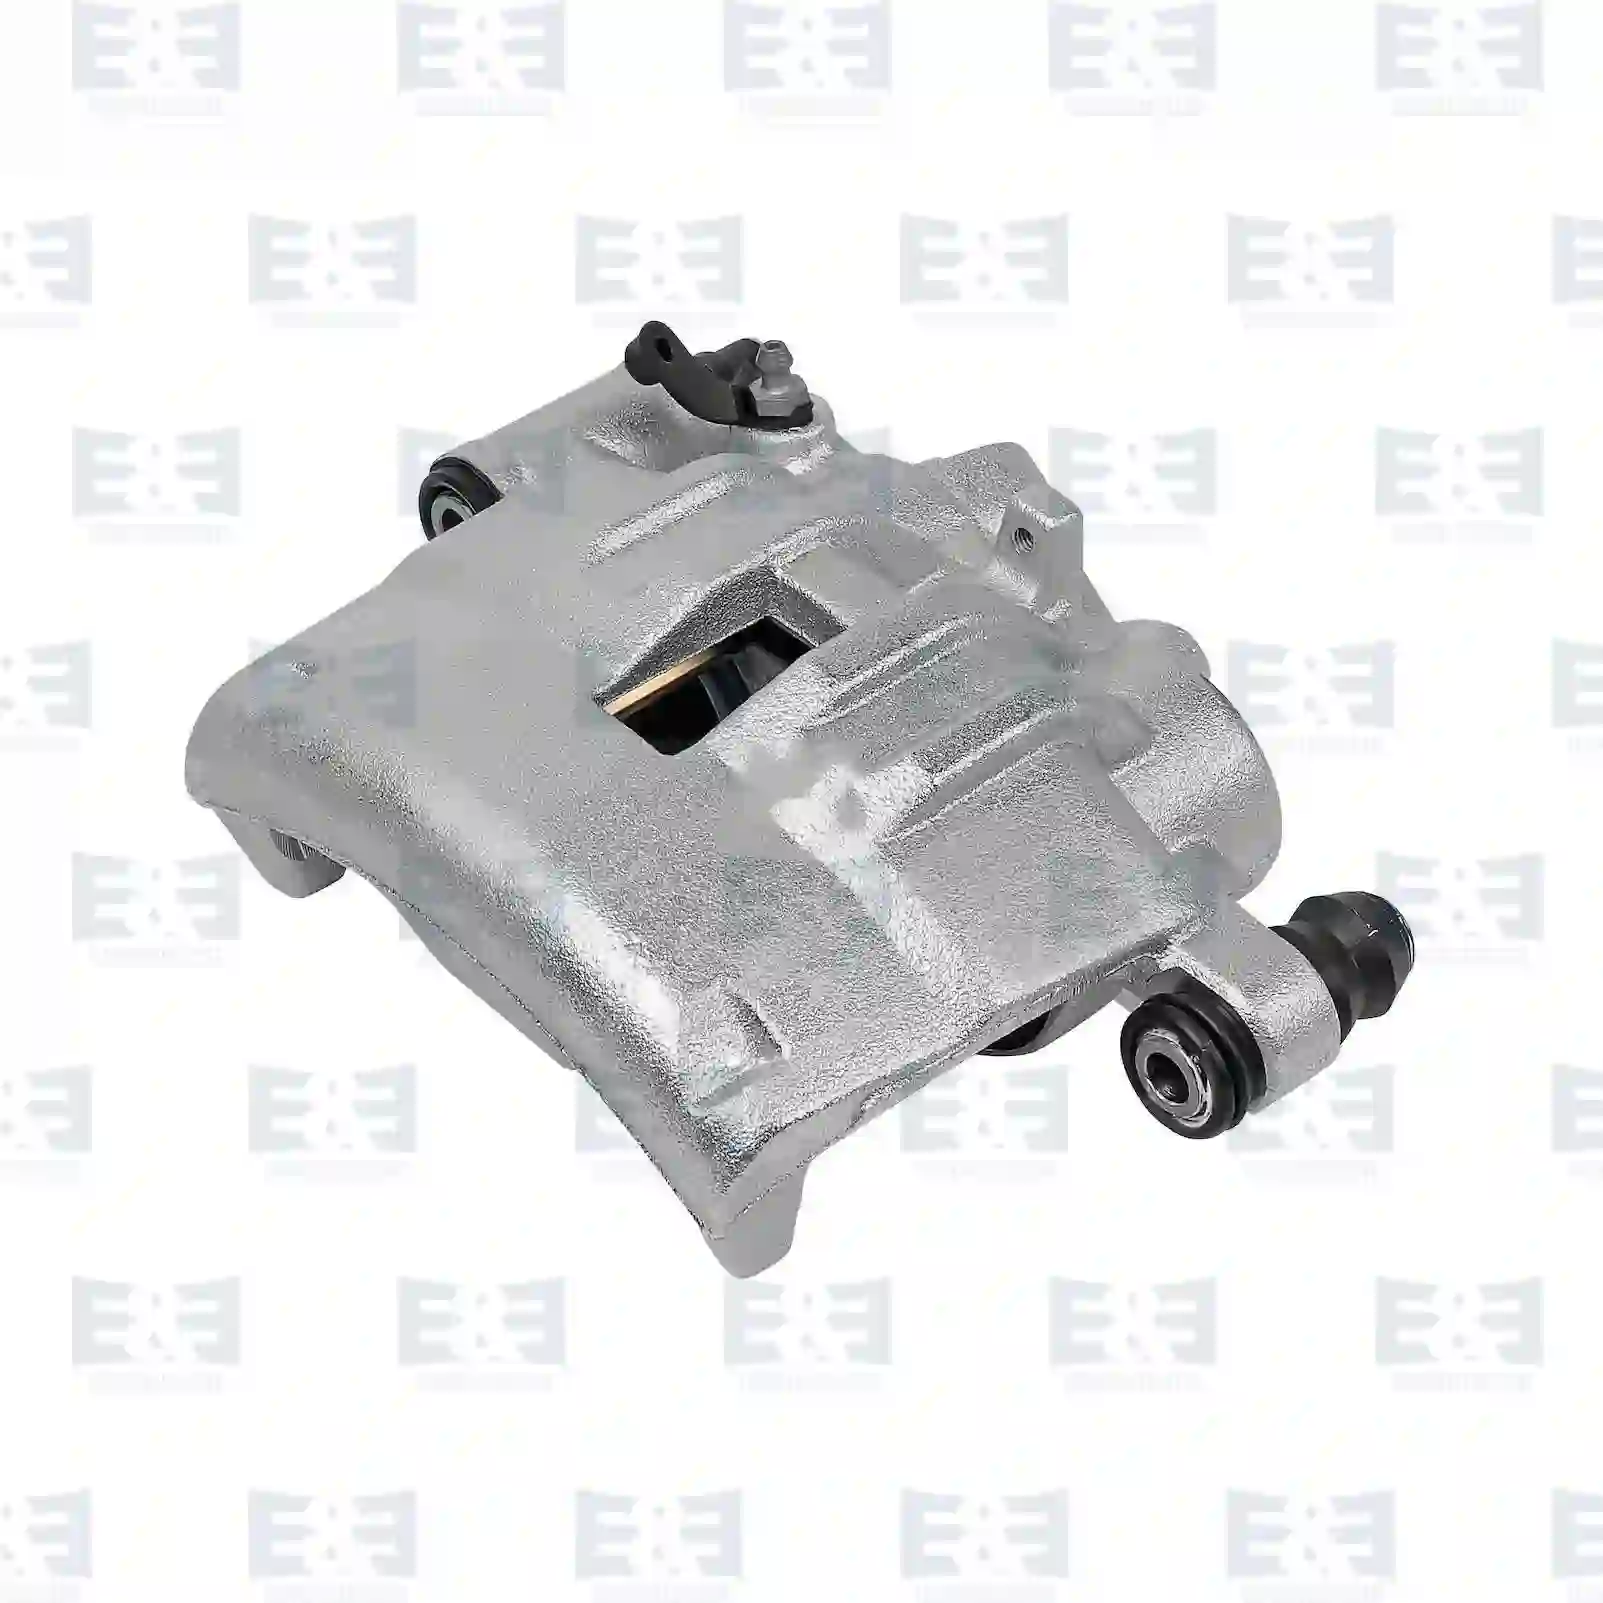 Brake caliper, left, reman. / without old core, 2E2297206, 5127483AA, 5135215AA, 0014206983, 0014208683, 0024203483, 0024205783, 9024201101, 9044200101, 9044200801, 2D0615105A, 2D0615105B, 2D0615123A, 2D0615423C ||  2E2297206 E&E Truck Spare Parts | Truck Spare Parts, Auotomotive Spare Parts Brake caliper, left, reman. / without old core, 2E2297206, 5127483AA, 5135215AA, 0014206983, 0014208683, 0024203483, 0024205783, 9024201101, 9044200101, 9044200801, 2D0615105A, 2D0615105B, 2D0615123A, 2D0615423C ||  2E2297206 E&E Truck Spare Parts | Truck Spare Parts, Auotomotive Spare Parts